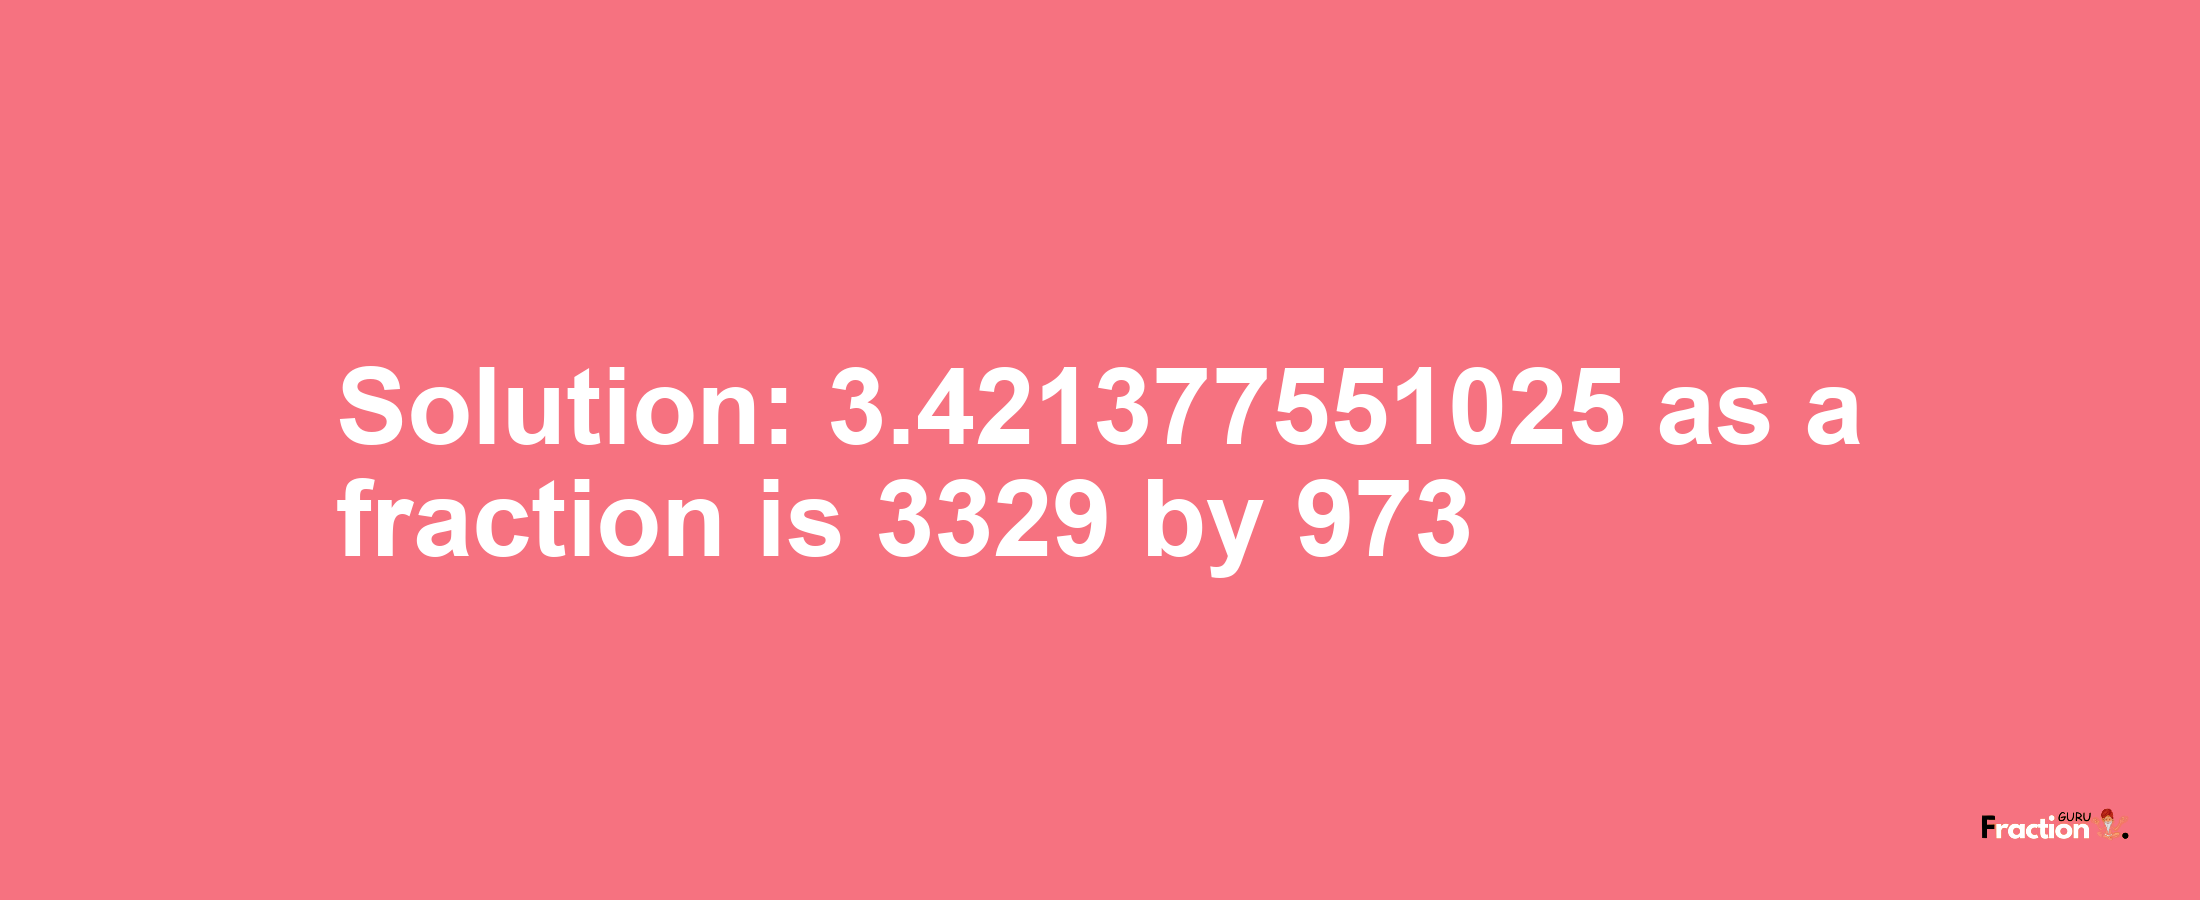 Solution:3.421377551025 as a fraction is 3329/973